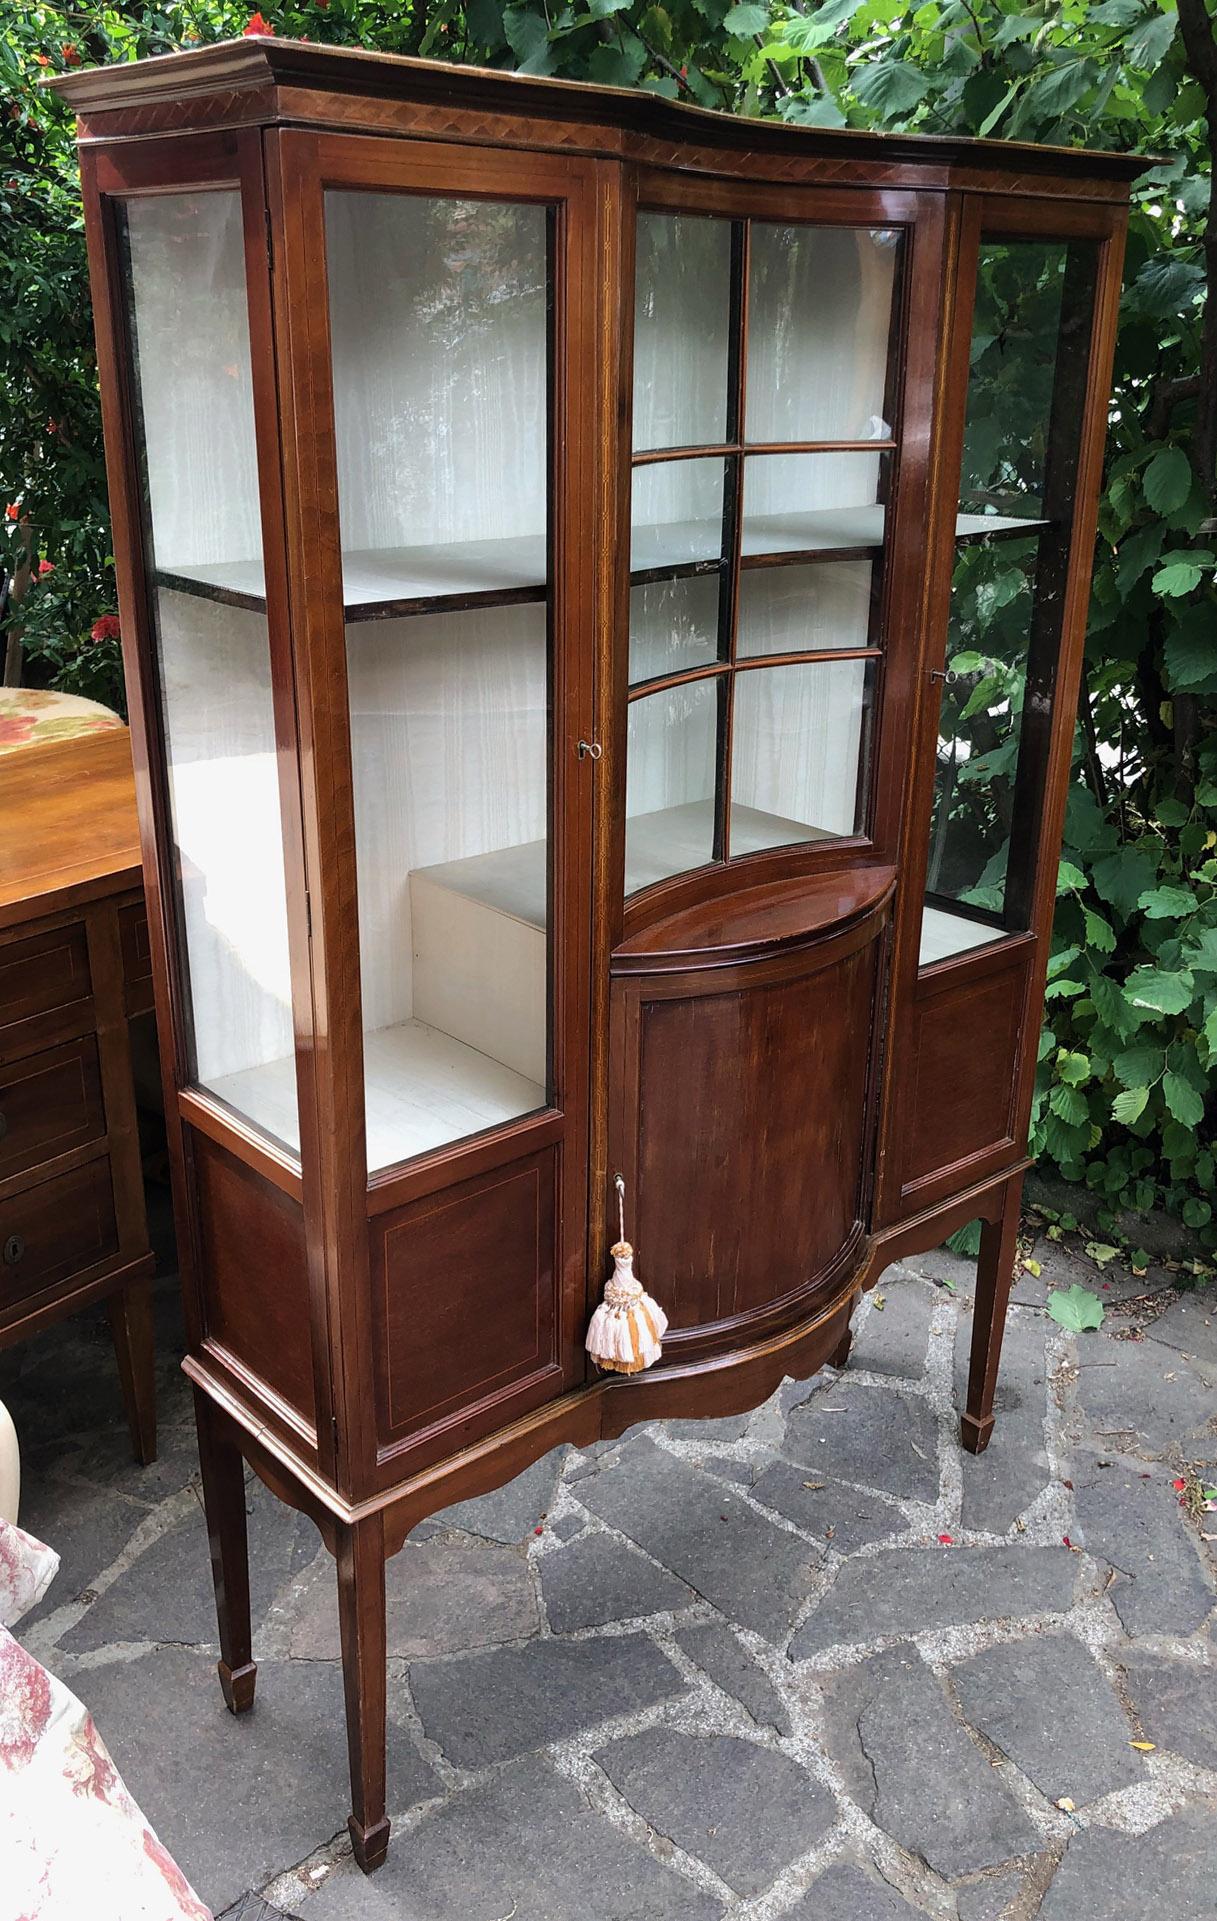 English showcase with three doors in mahogany, with glass on three sides. 
Curved central part.
Comes from an old house in the Florence area of Tuscany.
The paint is original in patina, honey amber color. 
As shown in the photographs and videos,